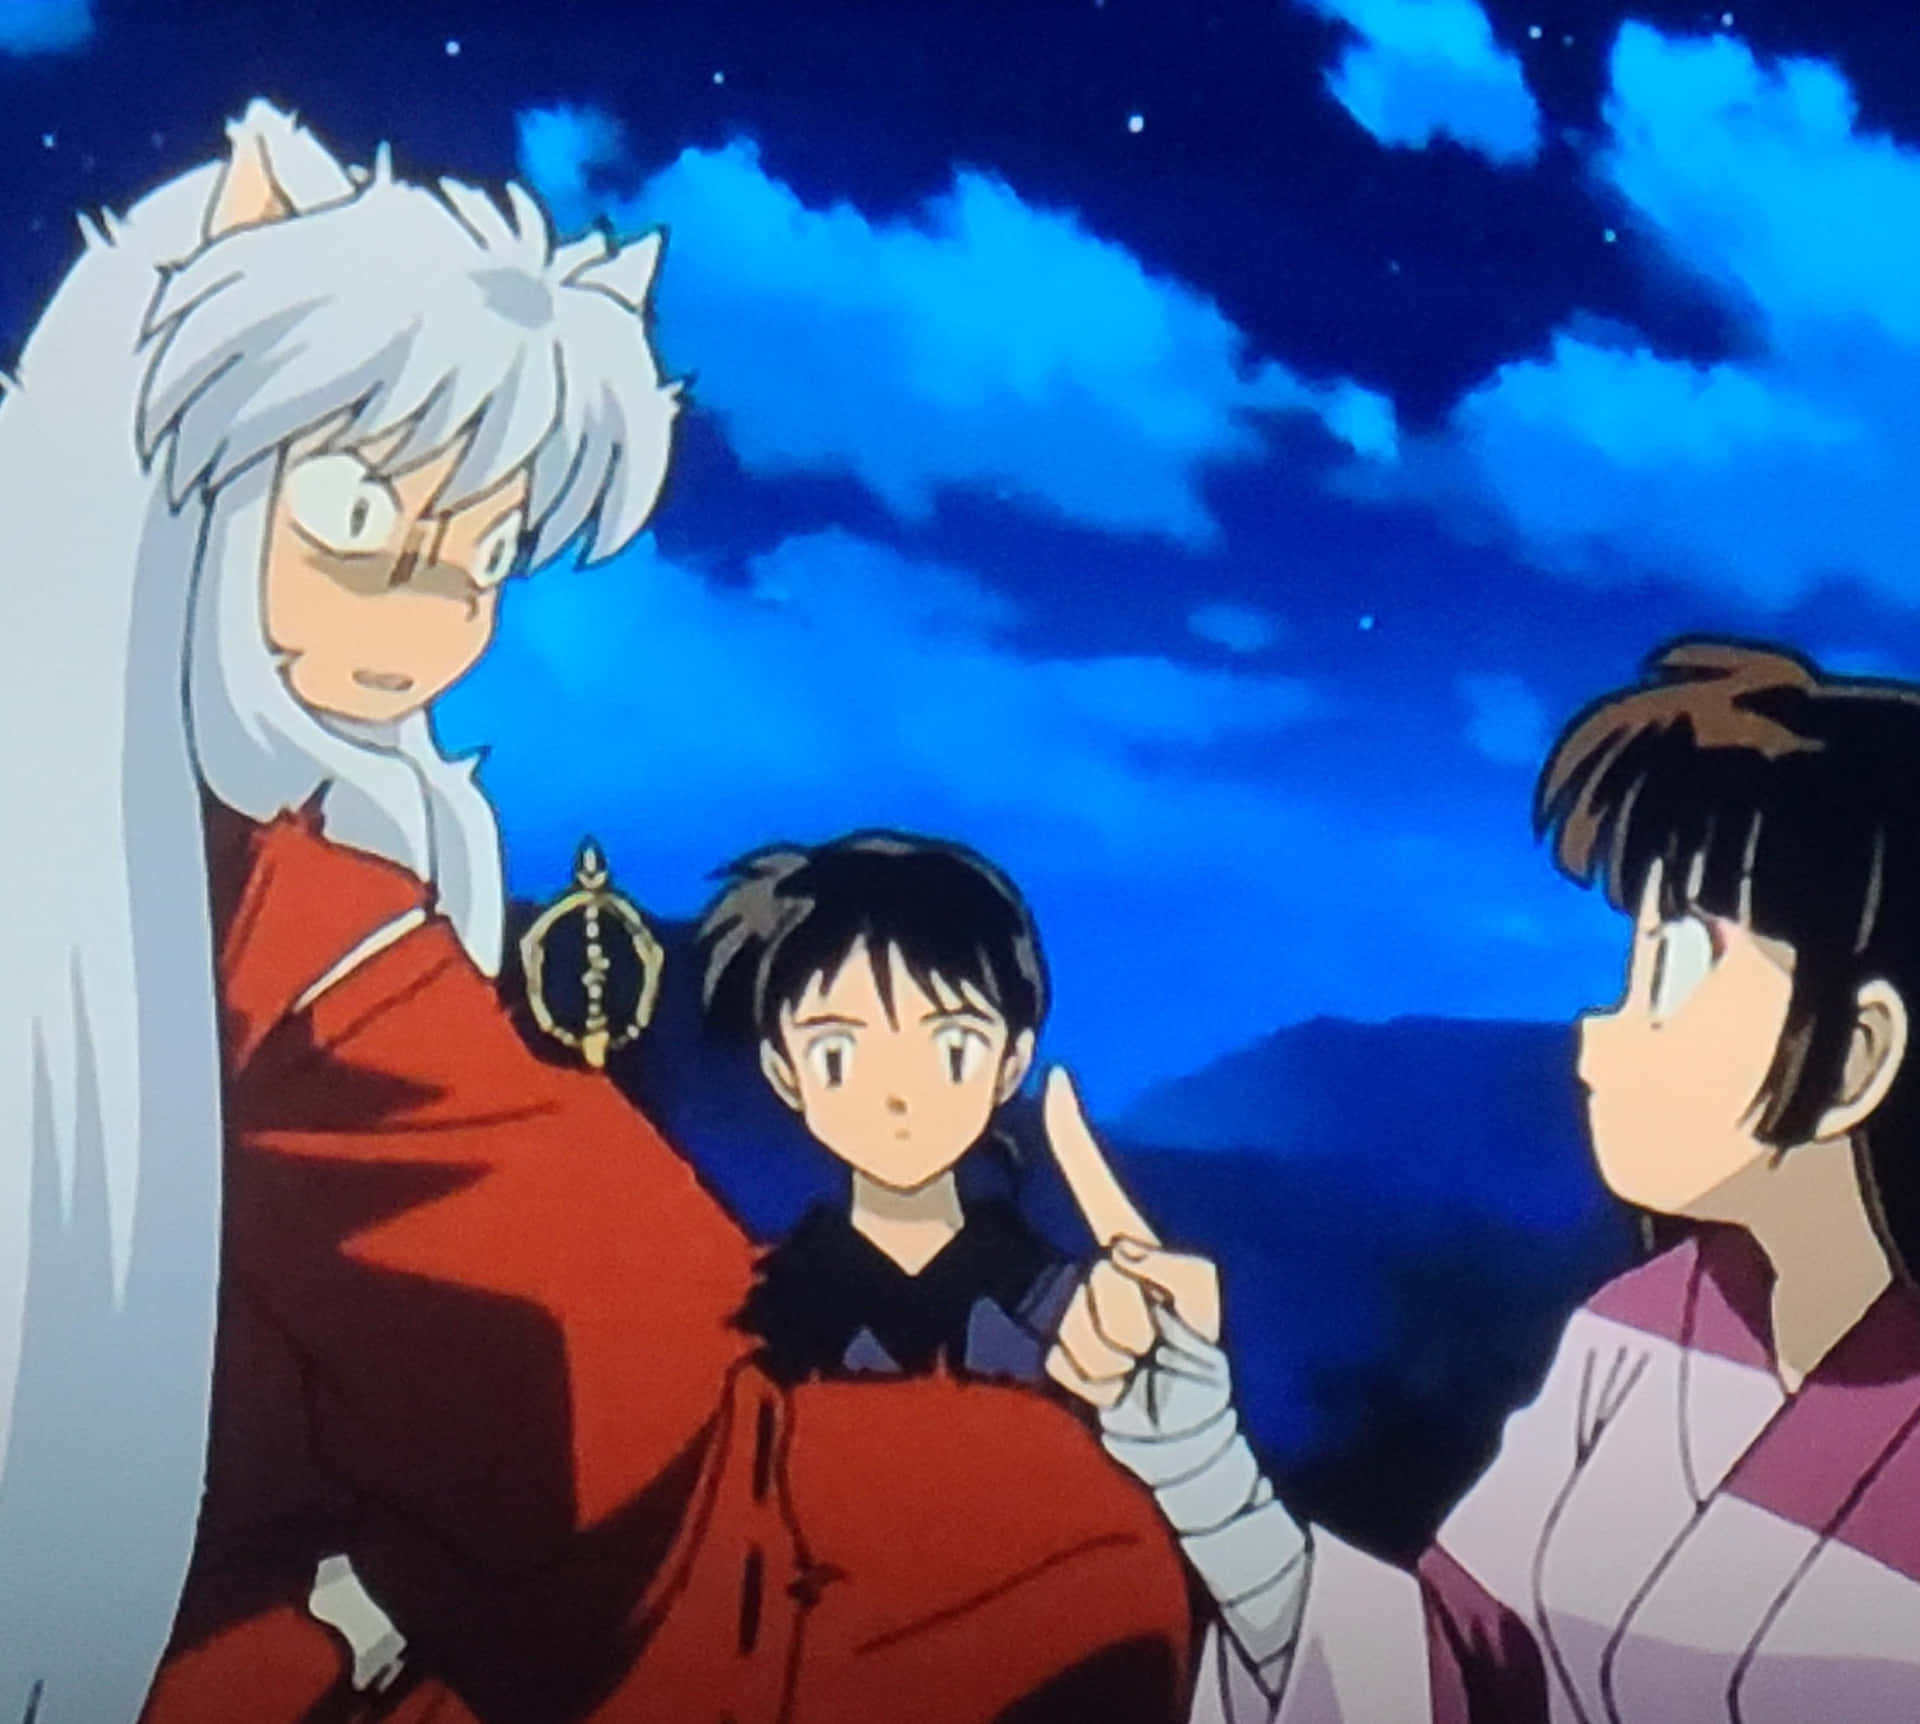 The whole crew of Inuyasha and his friends standing boldly together in the sunset. Wallpaper